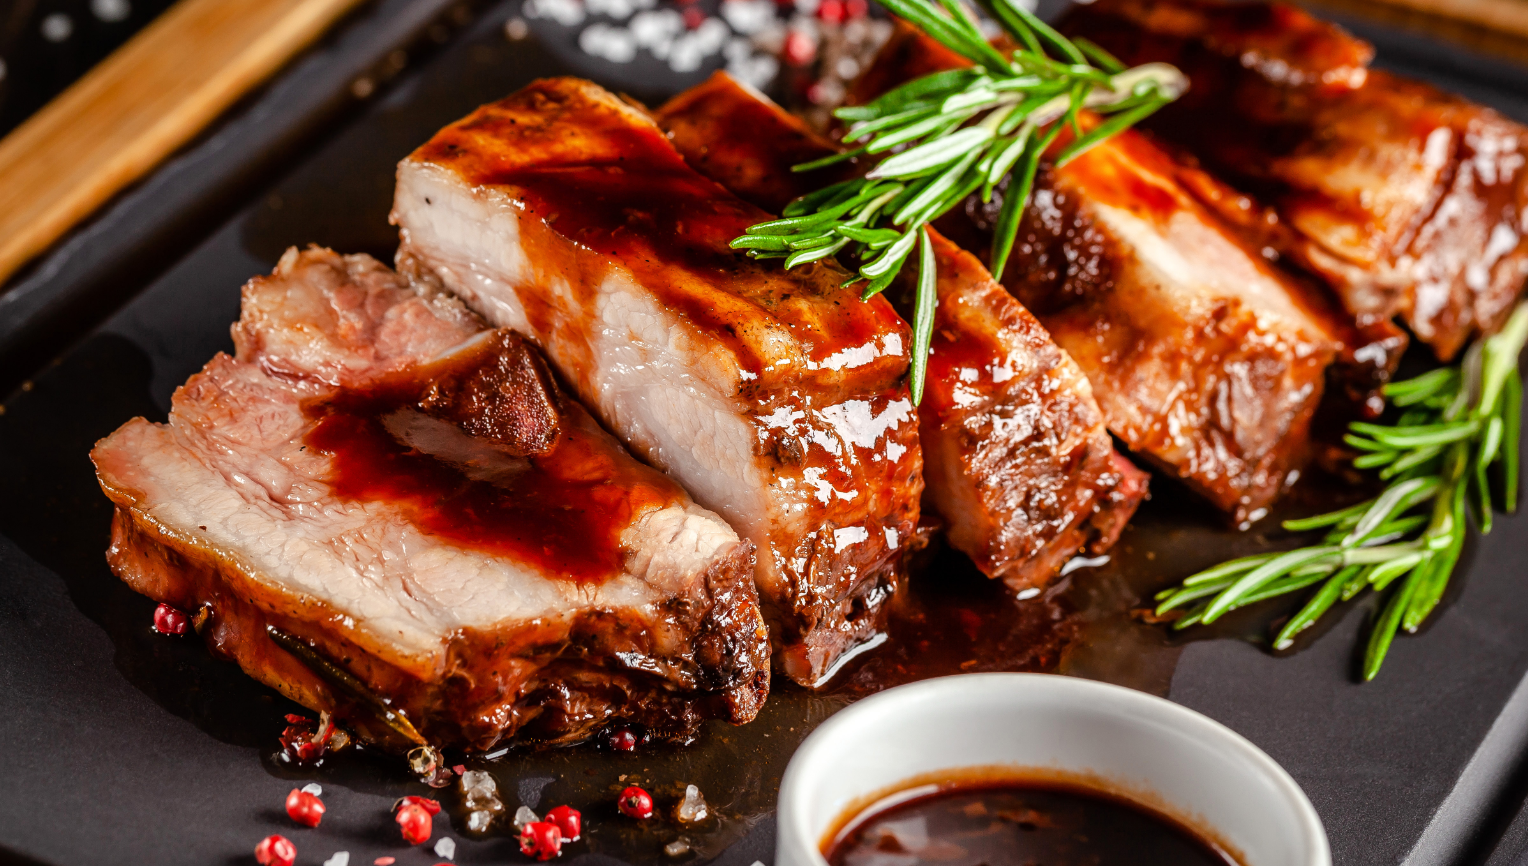 Pork roast marinated with siracha hot sauce, then served with an Asian-inspired sweet chili sauce for dipping, resulting in a savory and sweet custom flavor.